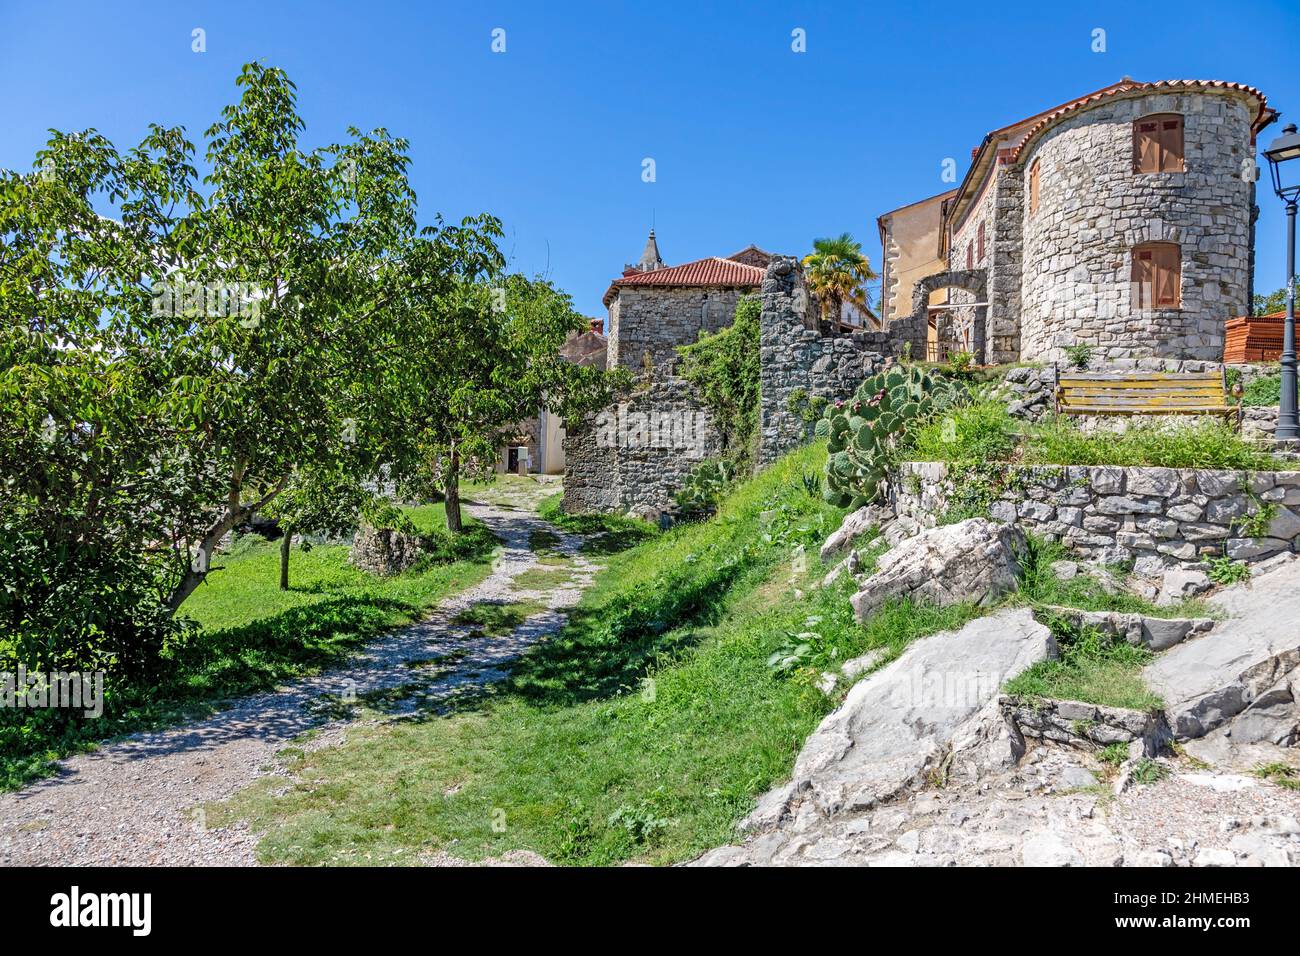 Street scene of the historic town Hum in Croatia during daytime Stock Photo